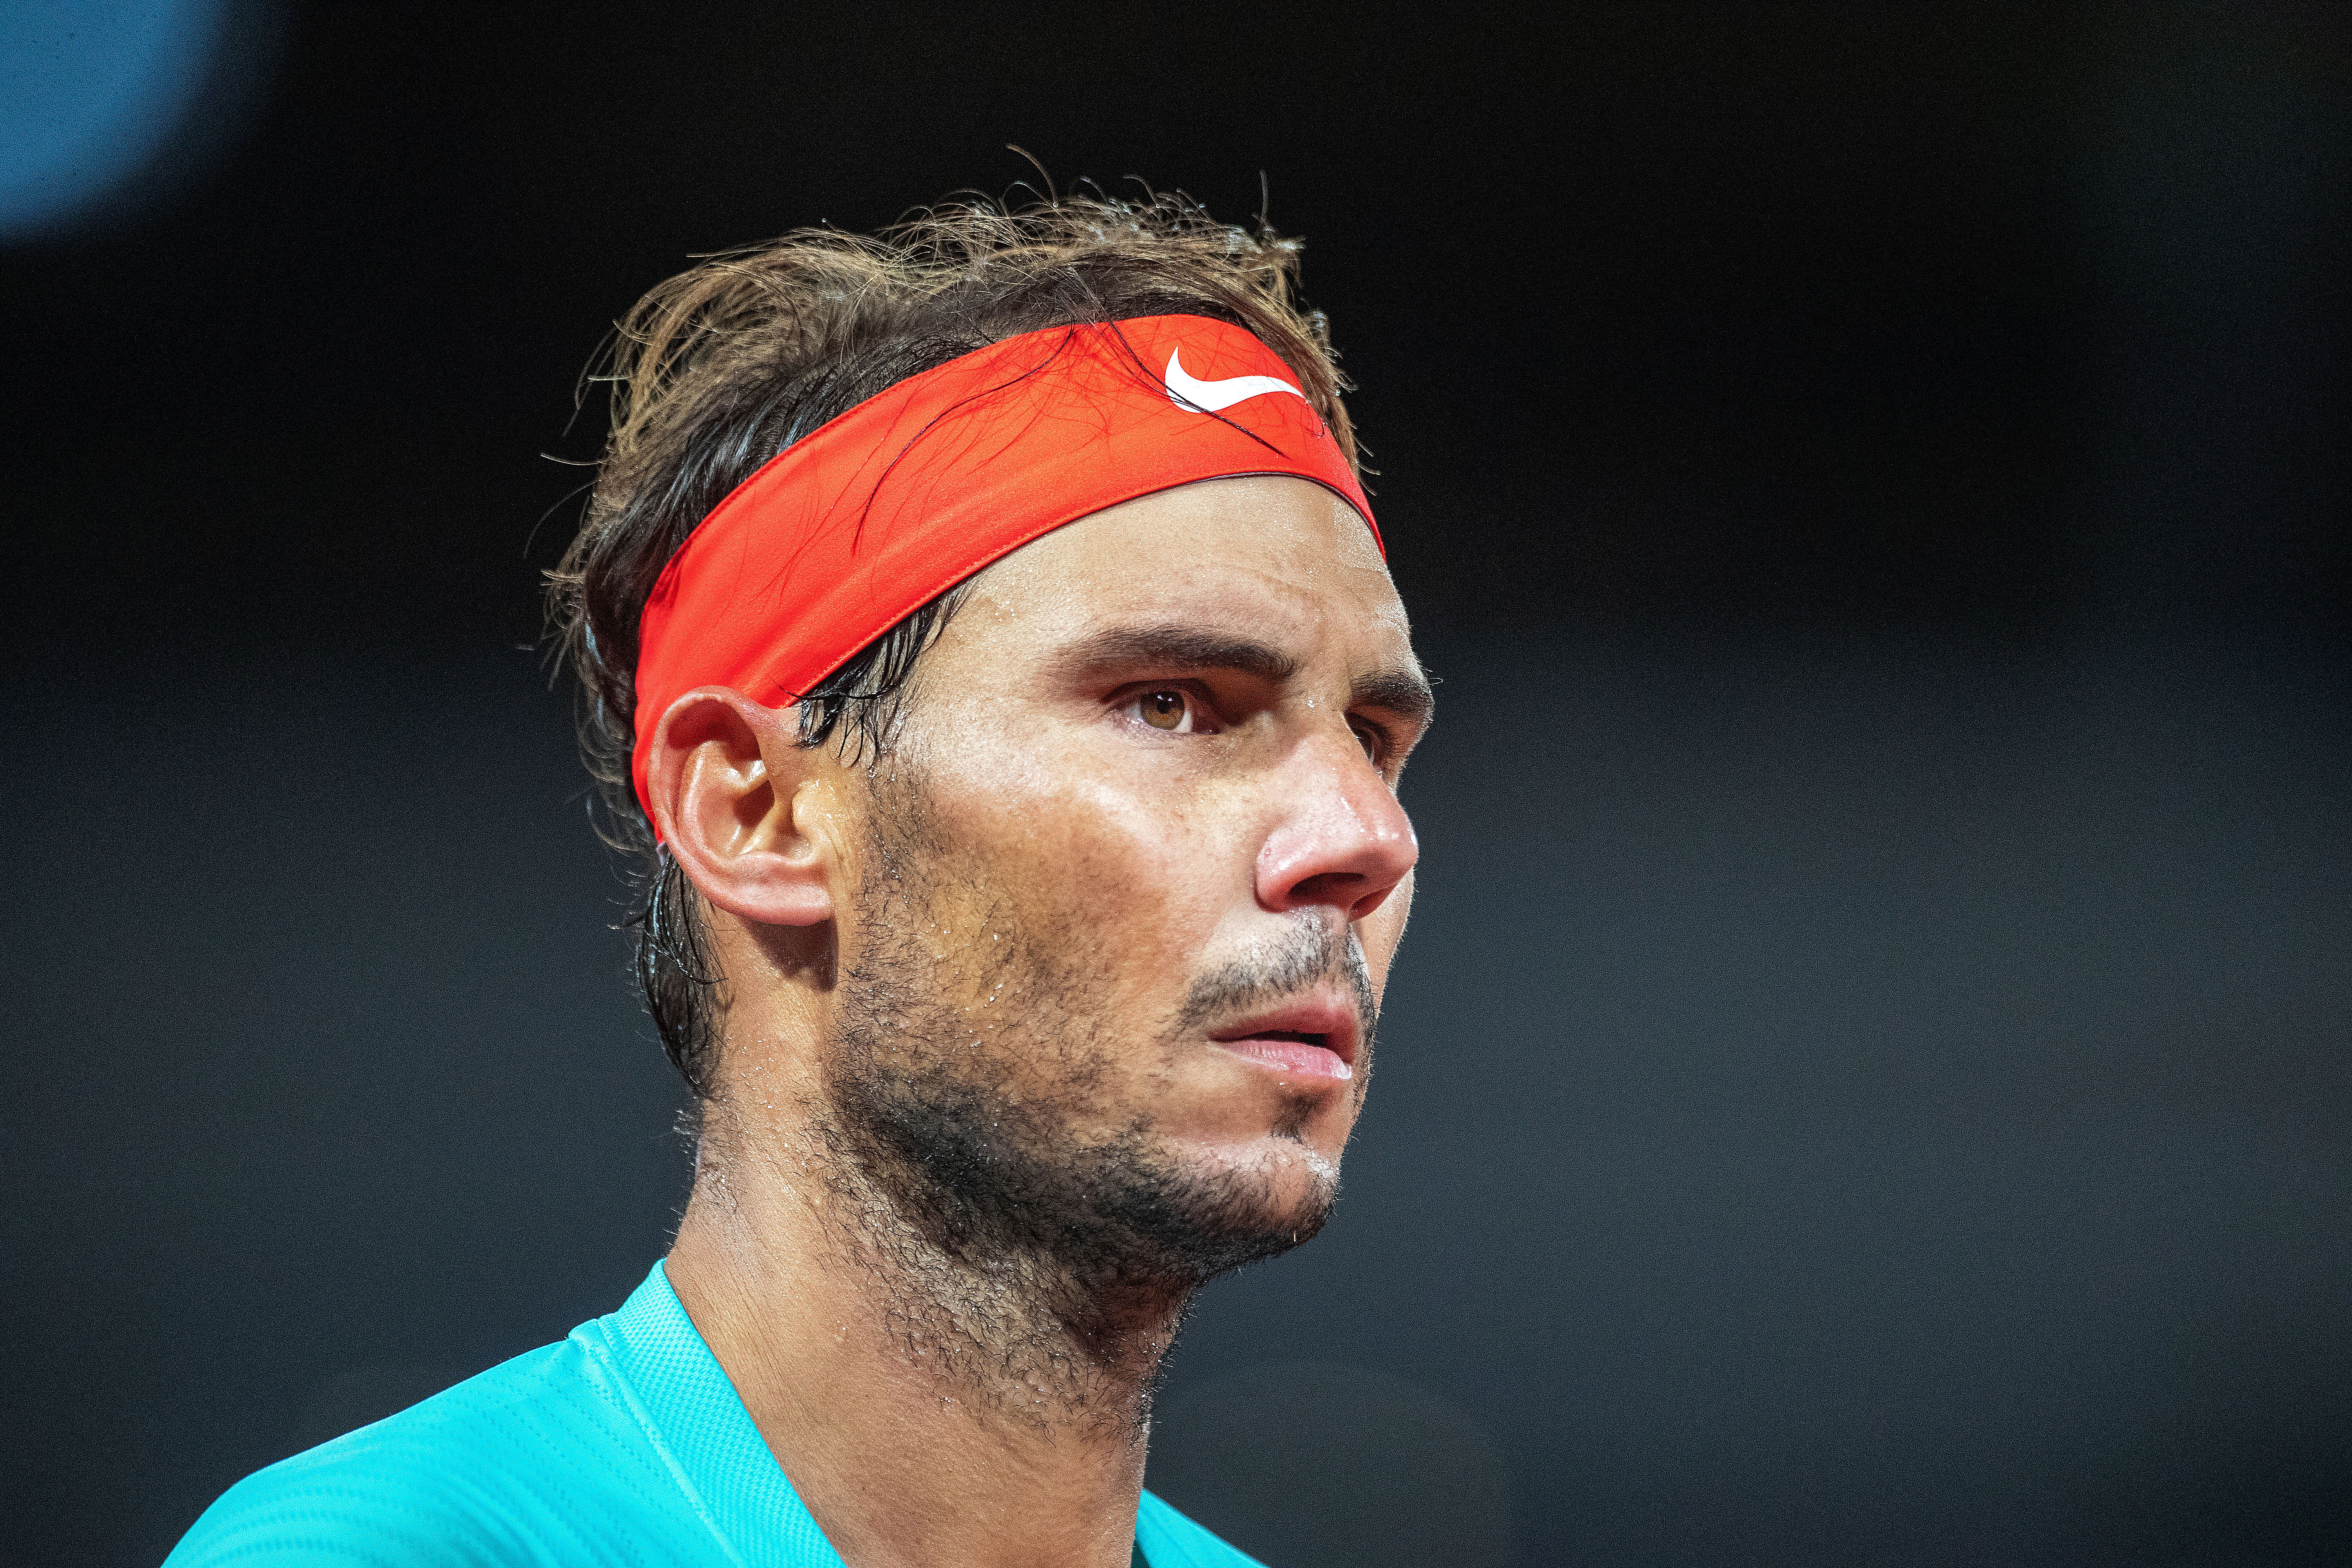 Rafael Nadal is seen during a match at the French Open in Paris on October 6. The Paris Masters tennis tournament is due to begin on November 2 with 20-time Grand Slam winner Nadal slated to take part.